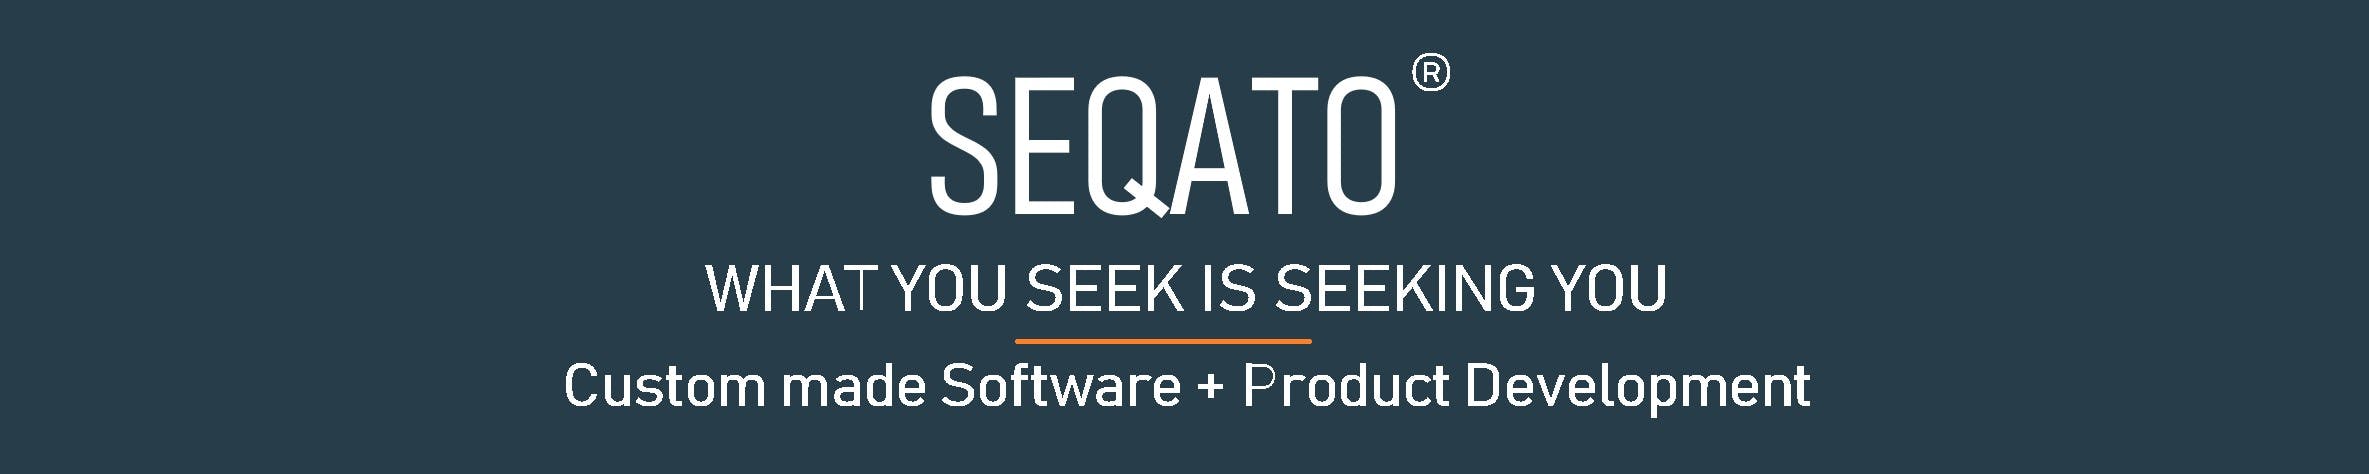 SEQATO Software Solutions